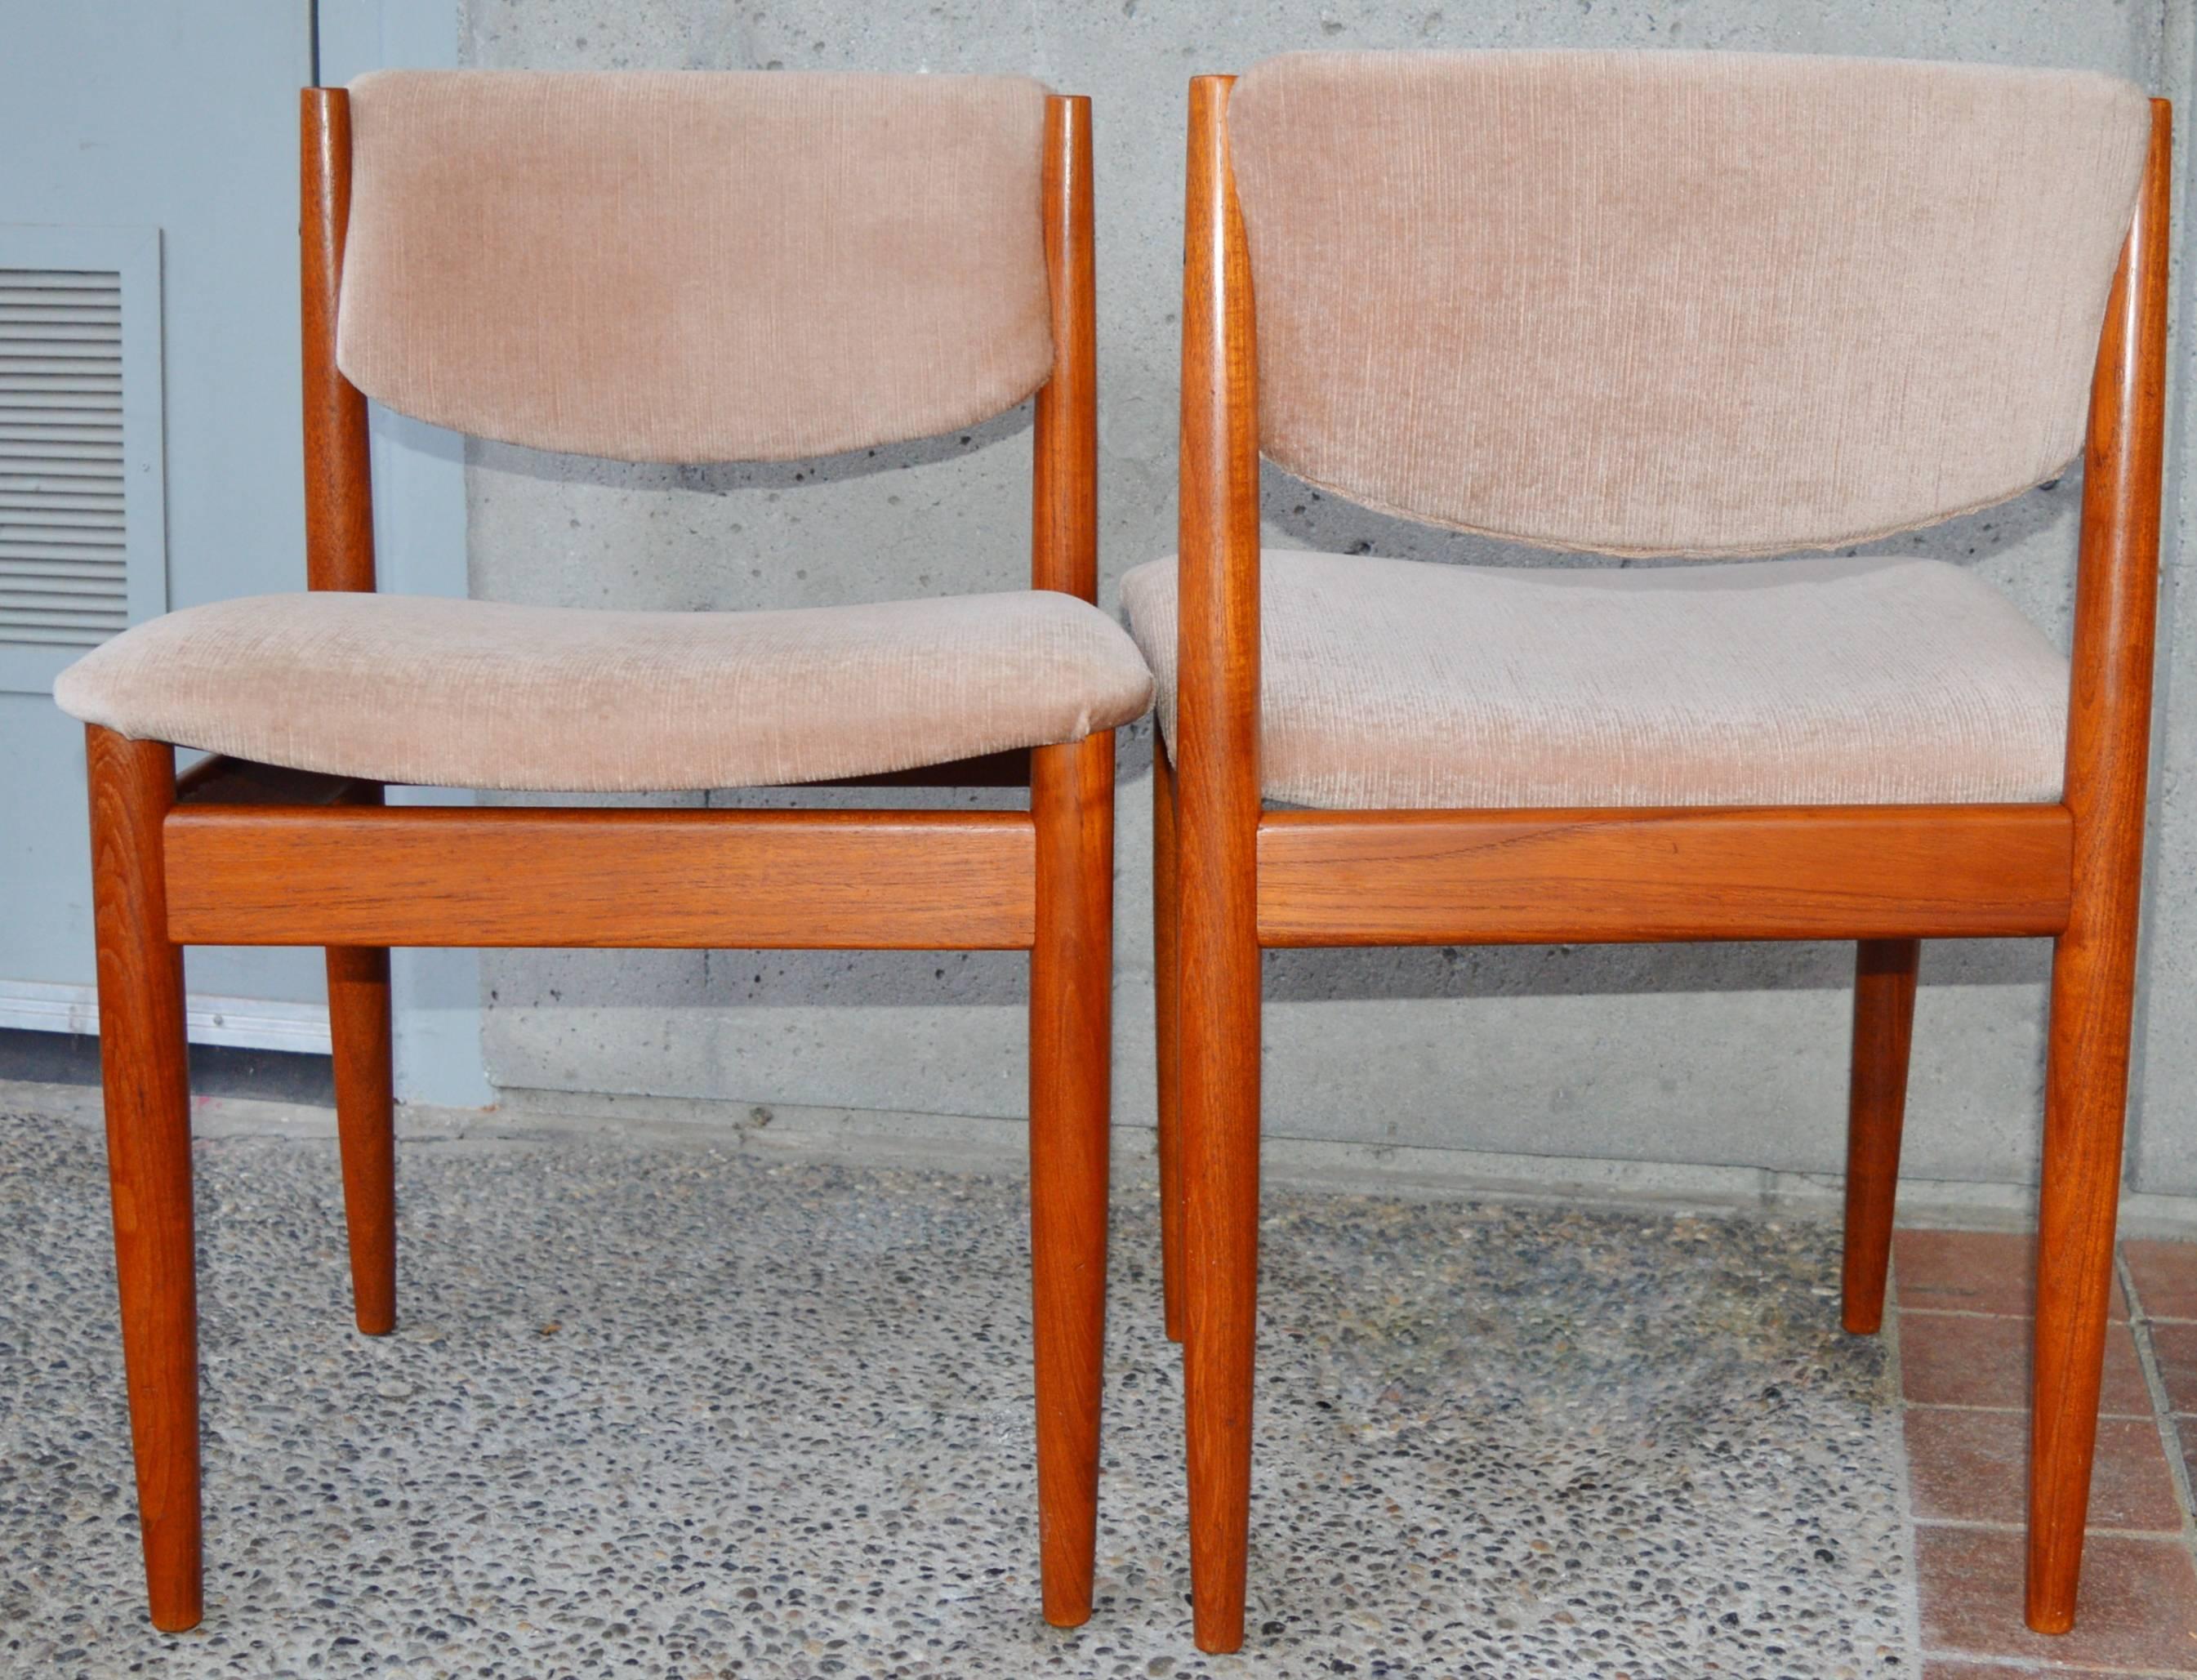 Set Six Teak Finn Juhl Dining Chairs Model 197 In Excellent Condition For Sale In New Westminster, British Columbia